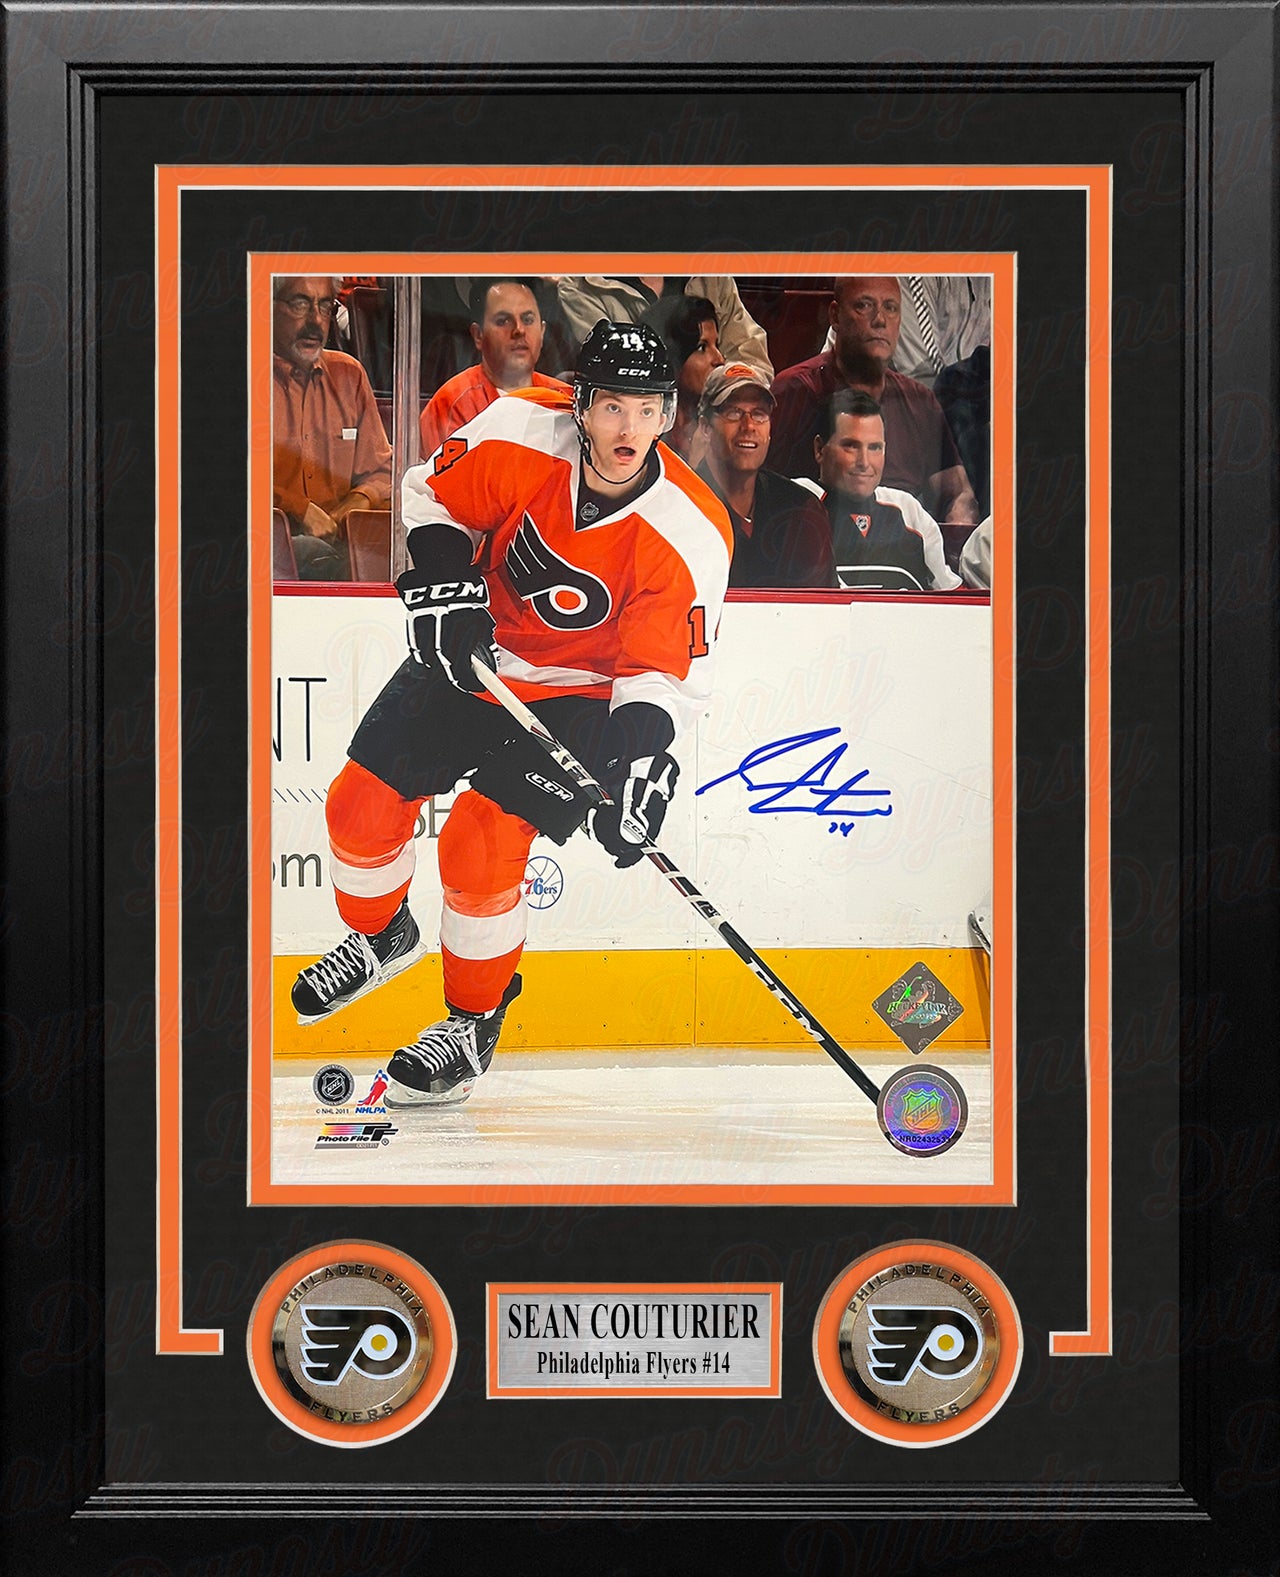 Sean Couturier in Action Philadelphia Flyers Autographed 8" x 10" Framed Hockey Photo